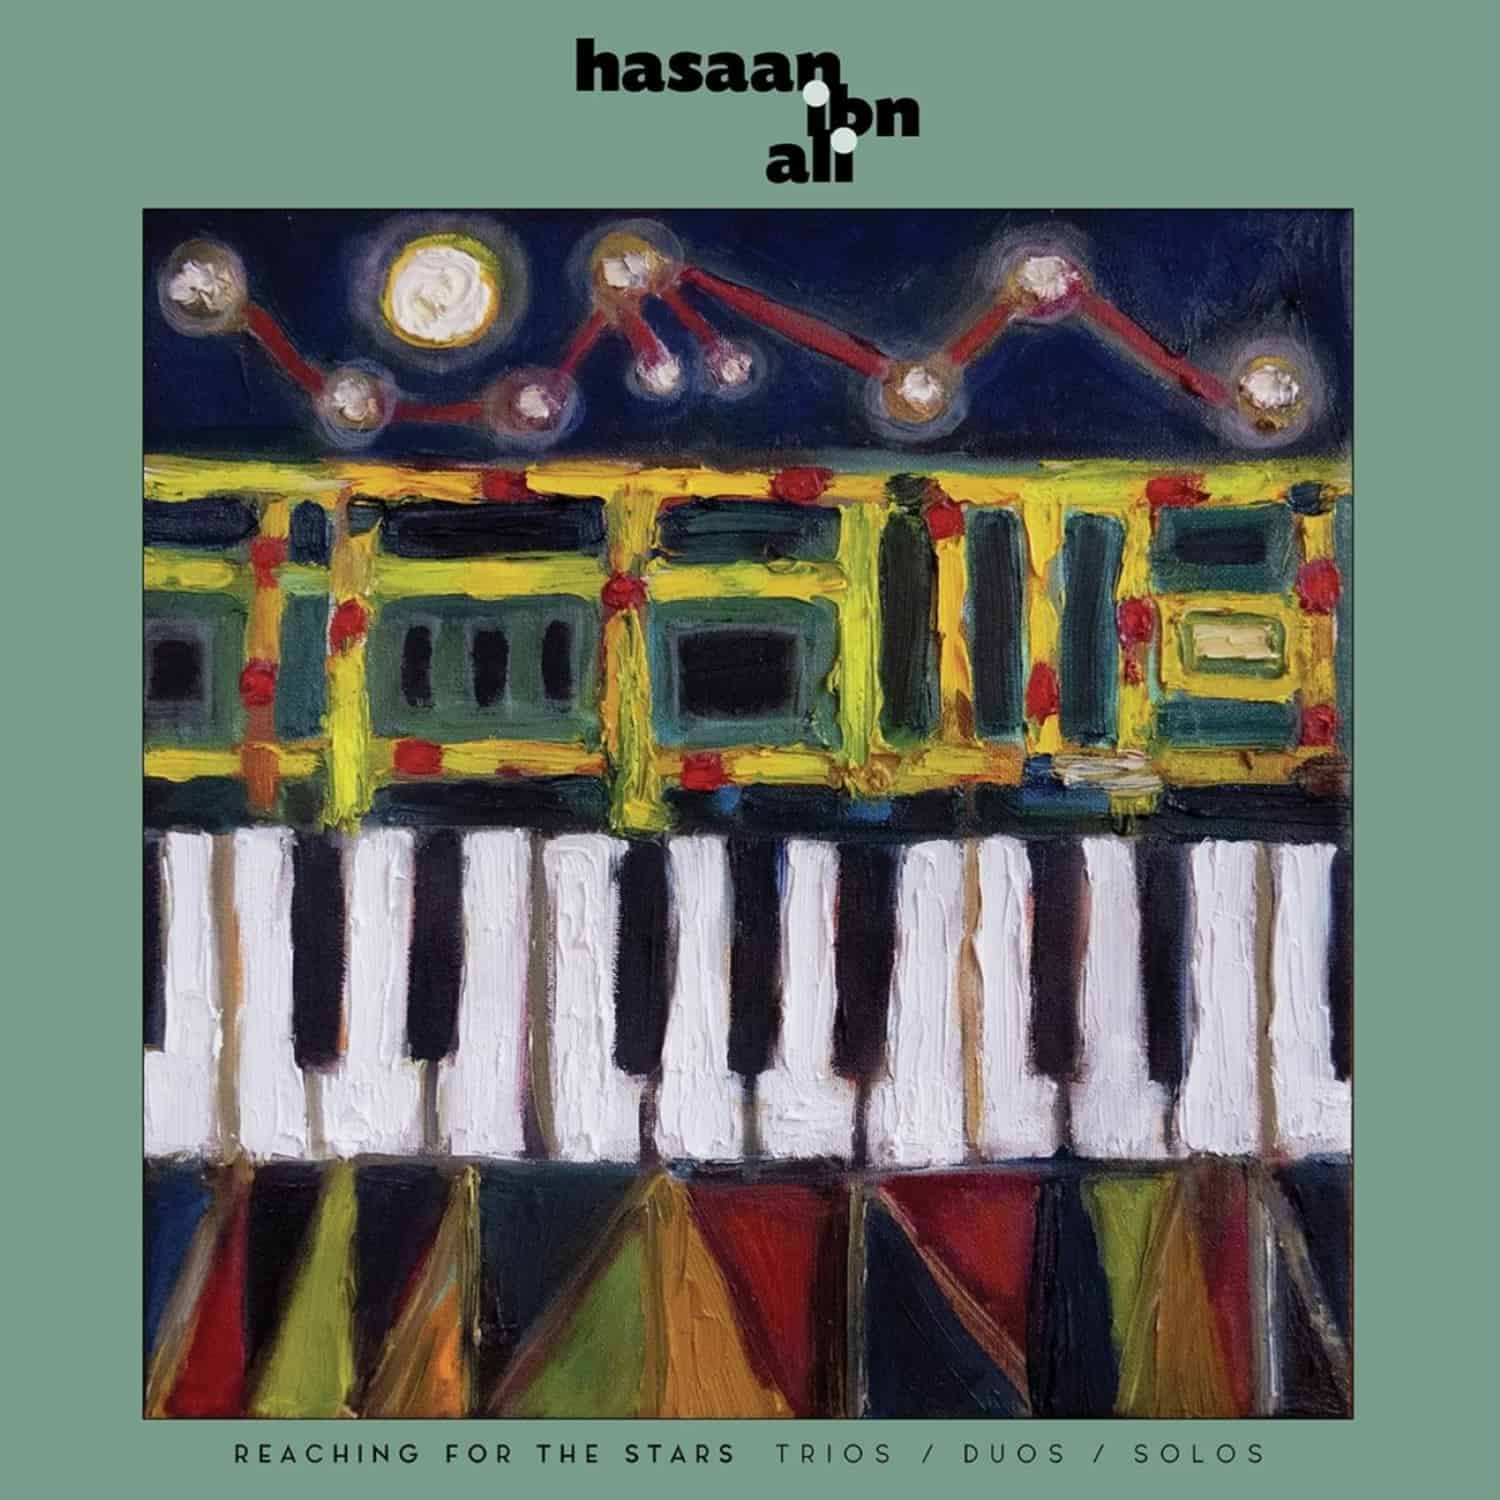 Hasaan Ibn Ali - REACHING FOR THE STARS:TRIOS / DUOS / SOLOS 